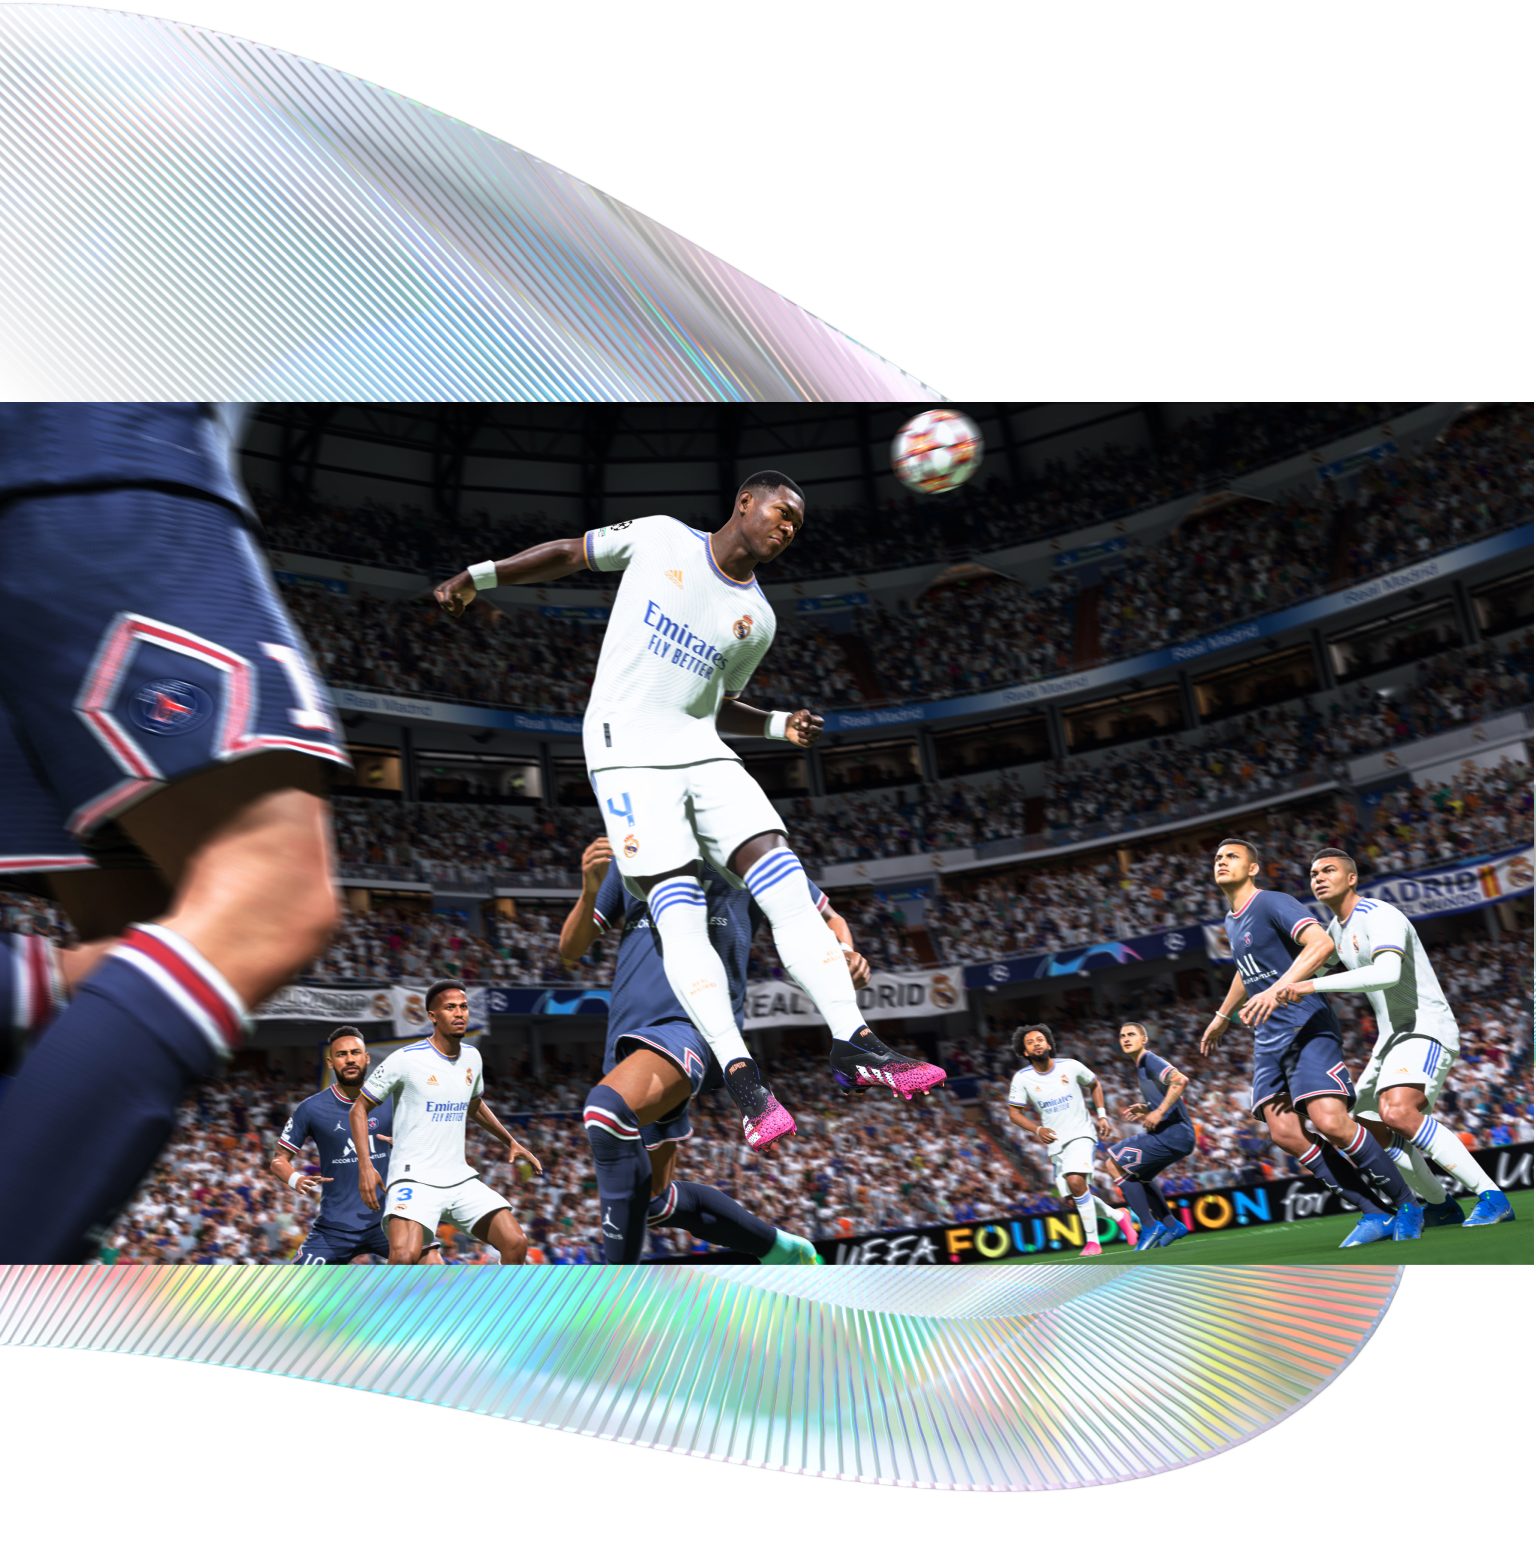 Electronic Arts - EA SPORTS Introduces FIFA 22 With Next-Gen HyperMotion  Technology, Bringing Football's Most Realistic and Immersive Gameplay  Experience to Life